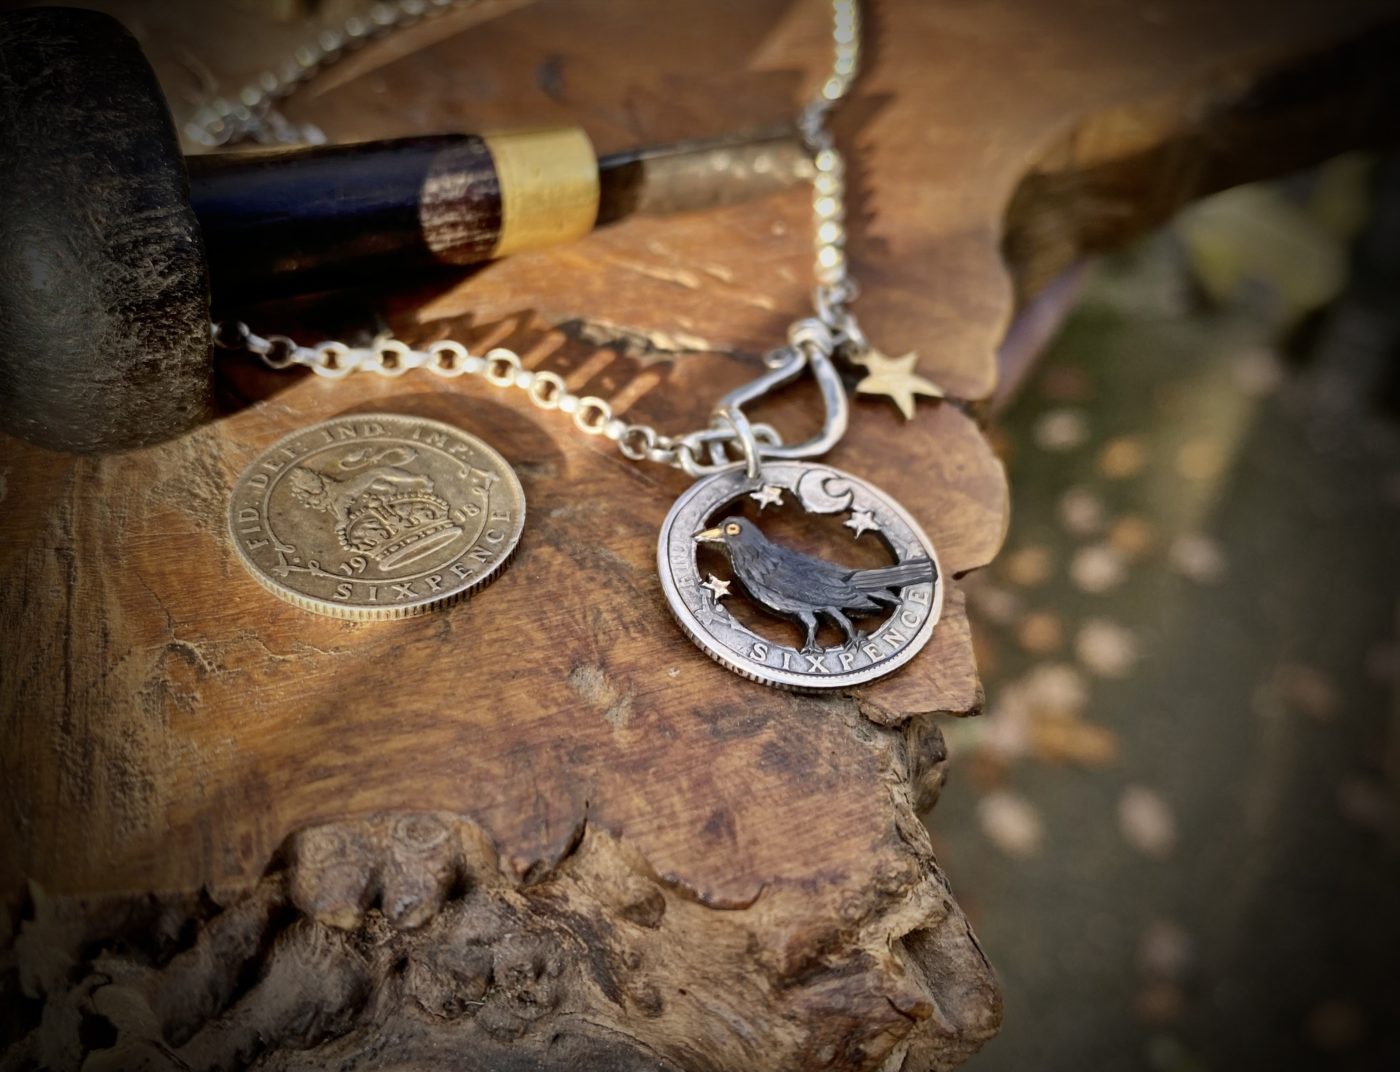 sing a song of sixpence blackbird jewellery. Handcrafted and recycled silver sixpence bklackbirdr necklace totally handcrafted and recycled from old sterling silver sixpence coins. Designed and created by Hairy Growler Jewellery, Cambridge, UK. necklace